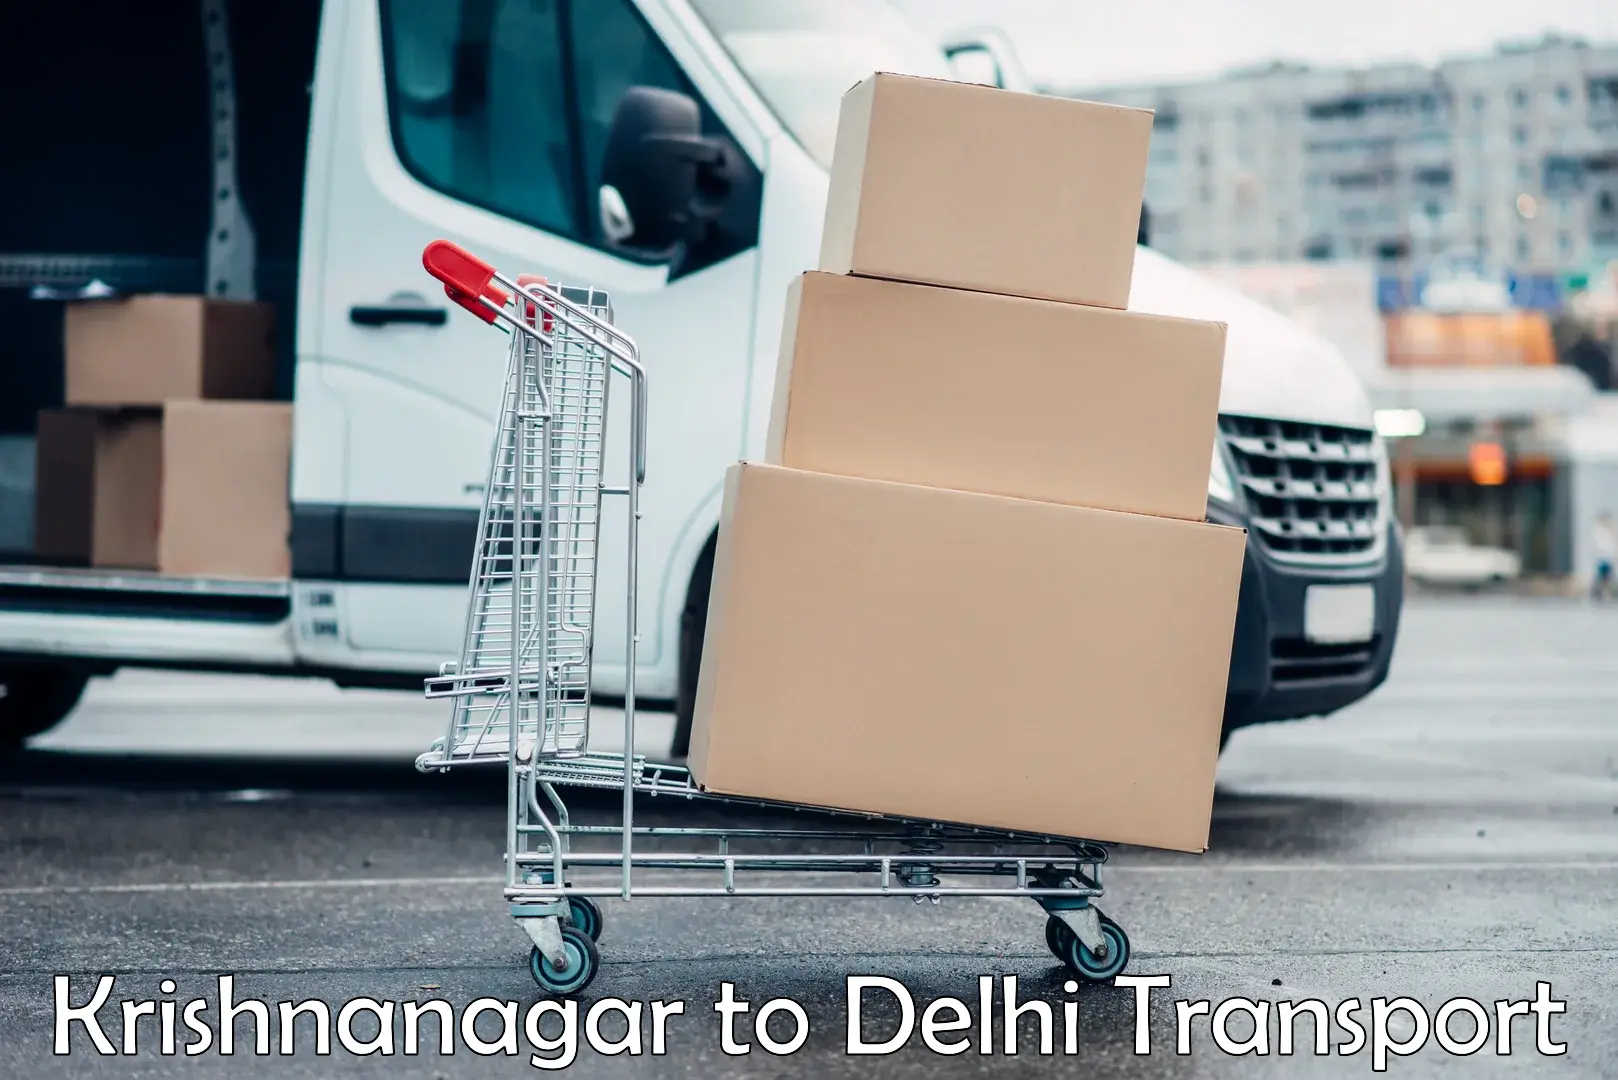 Container transport service Krishnanagar to NCR